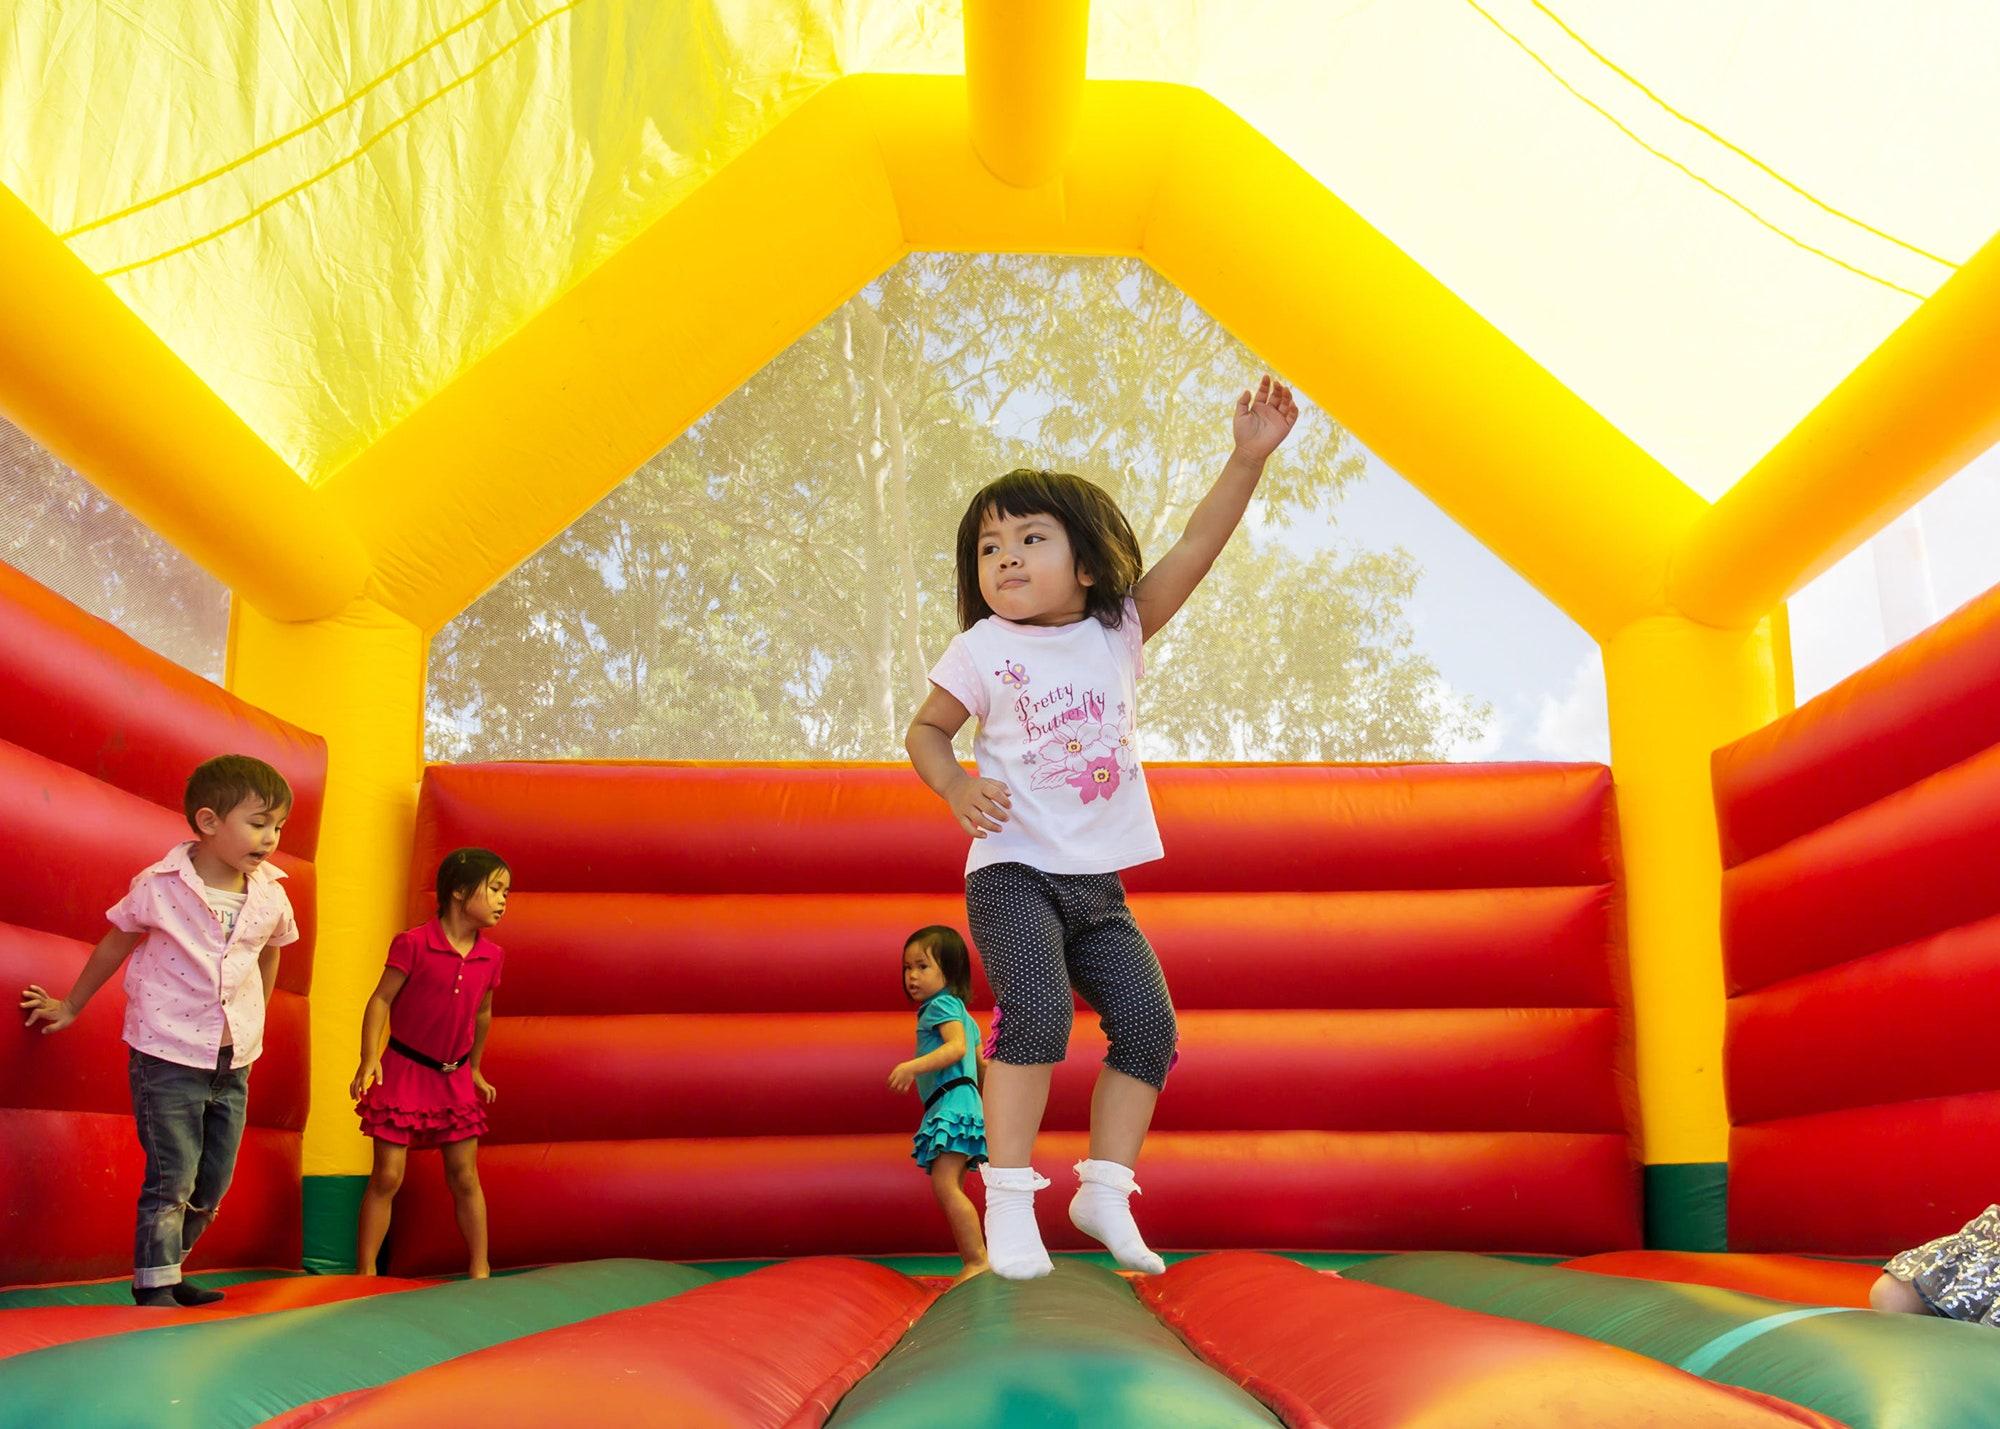 How Bouncy Houses Became the Saviors of Pandemic Parenting | Vanity Fair